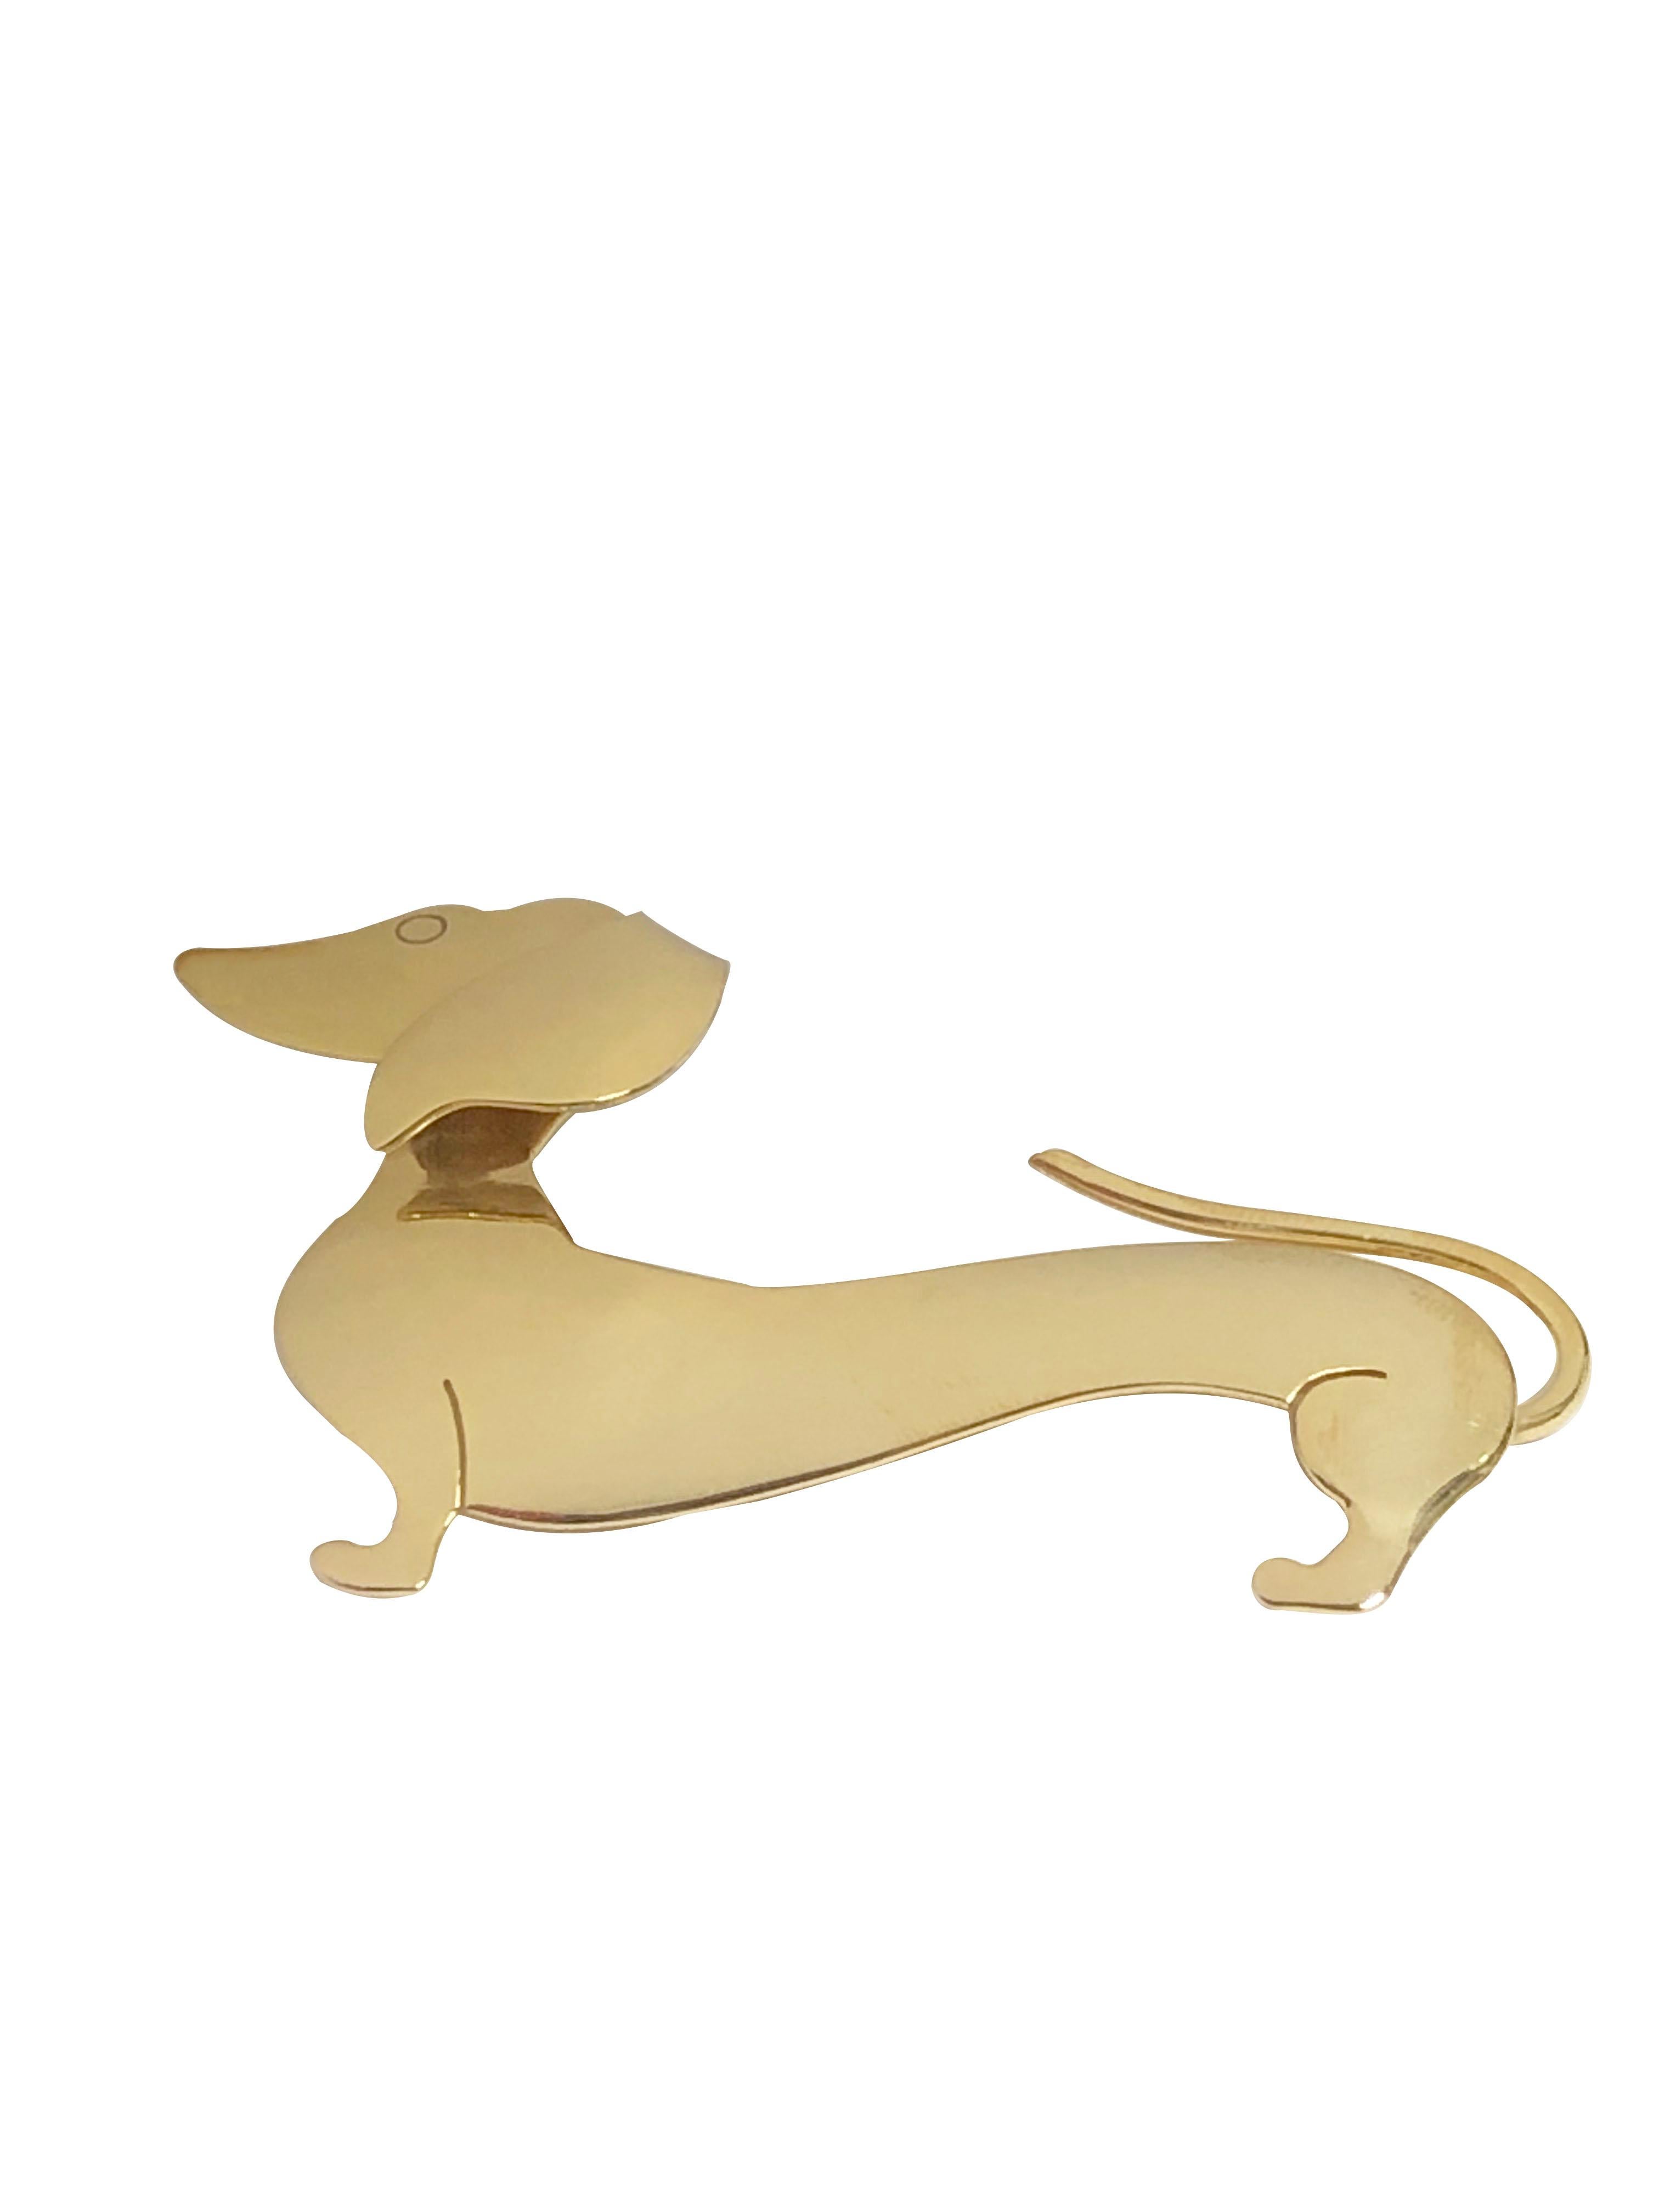 Circa 1960s Dachshund Dog Brooch by Orb, Gold was on Sterling Silver, measuring 2 5/8 inches in length and 1 1/2 inches high. Excellent condition. 